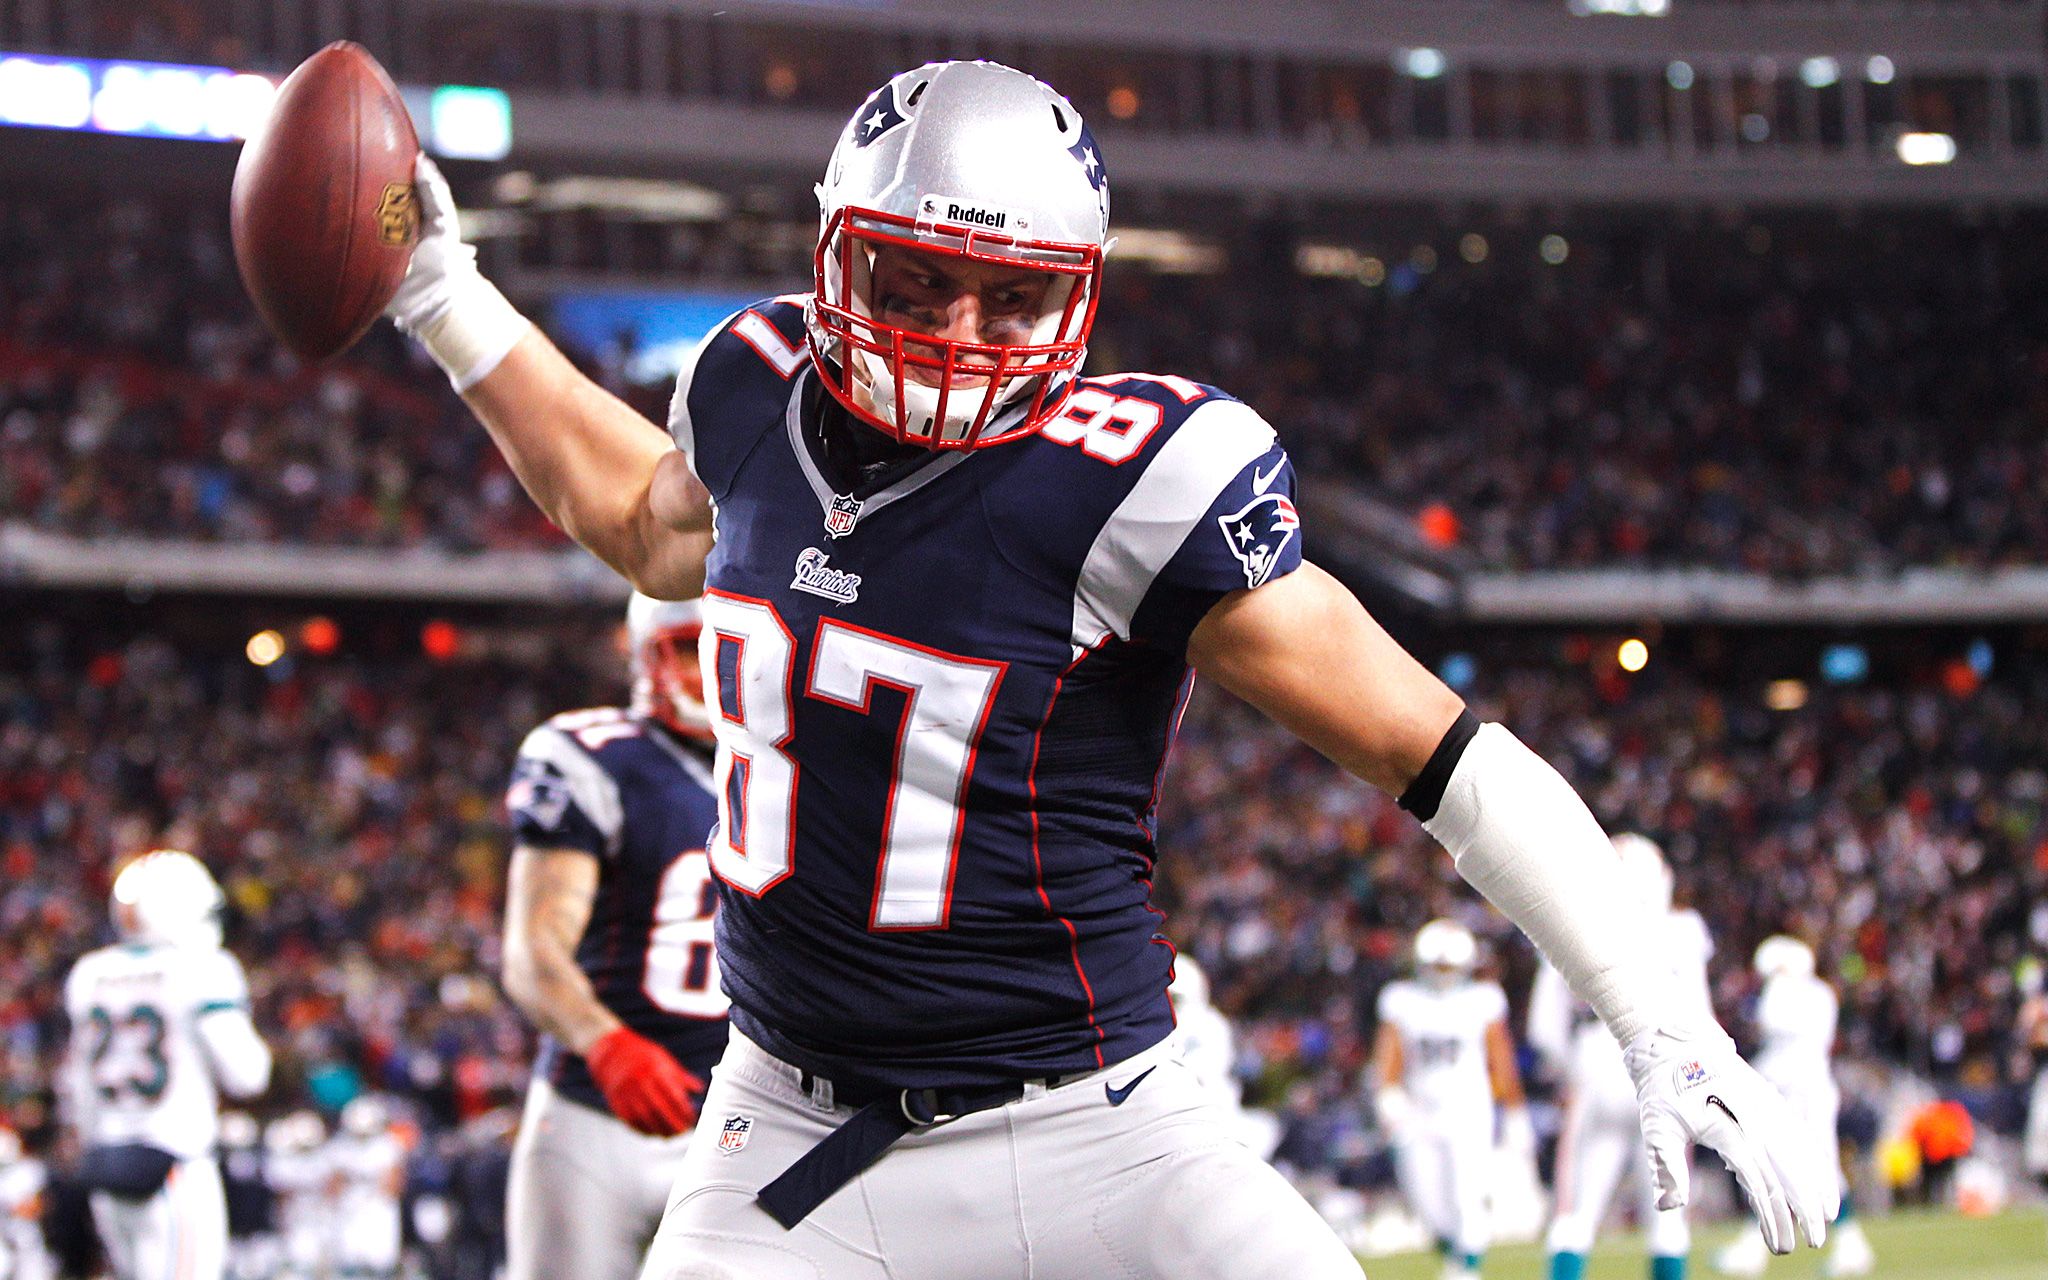 2048x1280 Free Download Rob Gronkowski Hd Wallpaper Download 2048x1280 For Your Desktop Mobile Tablet Explore Rob Gronkowski 2022 Wallpaper Rob Gronkowski 2022 Wallpaper Rob Gronkowski Wallpaper Rob Pattinson Wallpaper